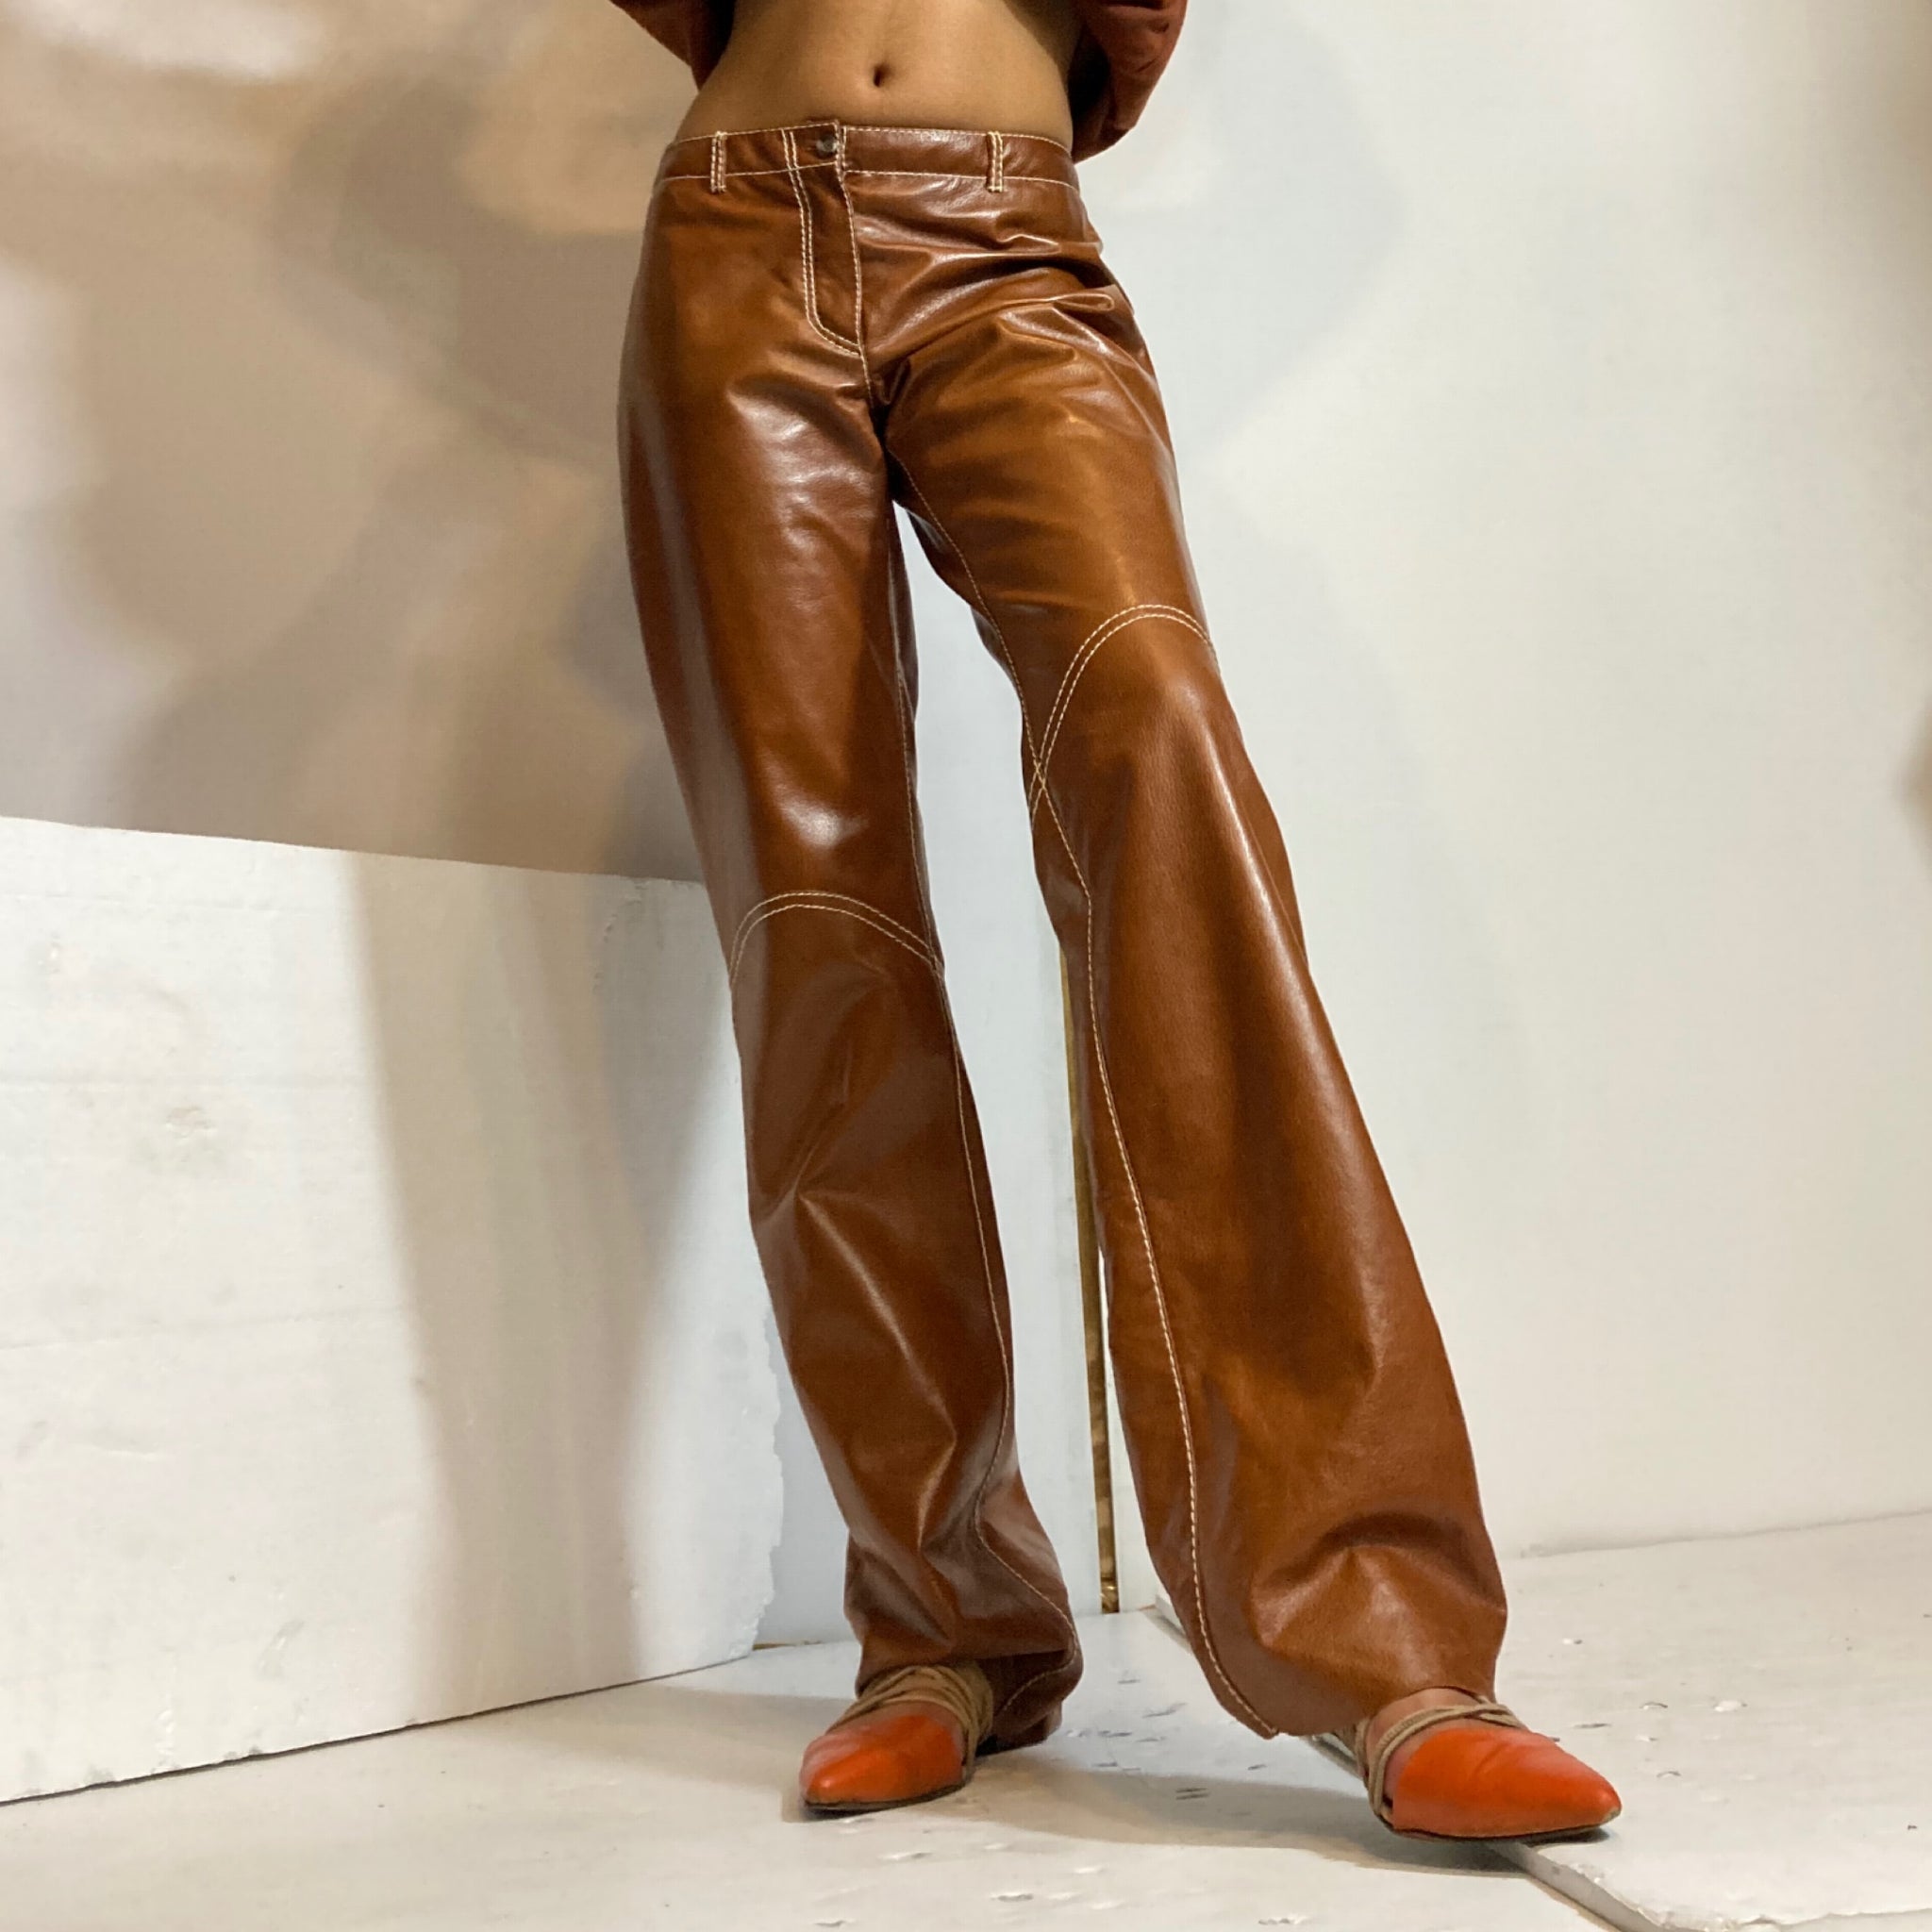 Santacroce Firenze Leather Trousers Size 44 – Lucille Golden